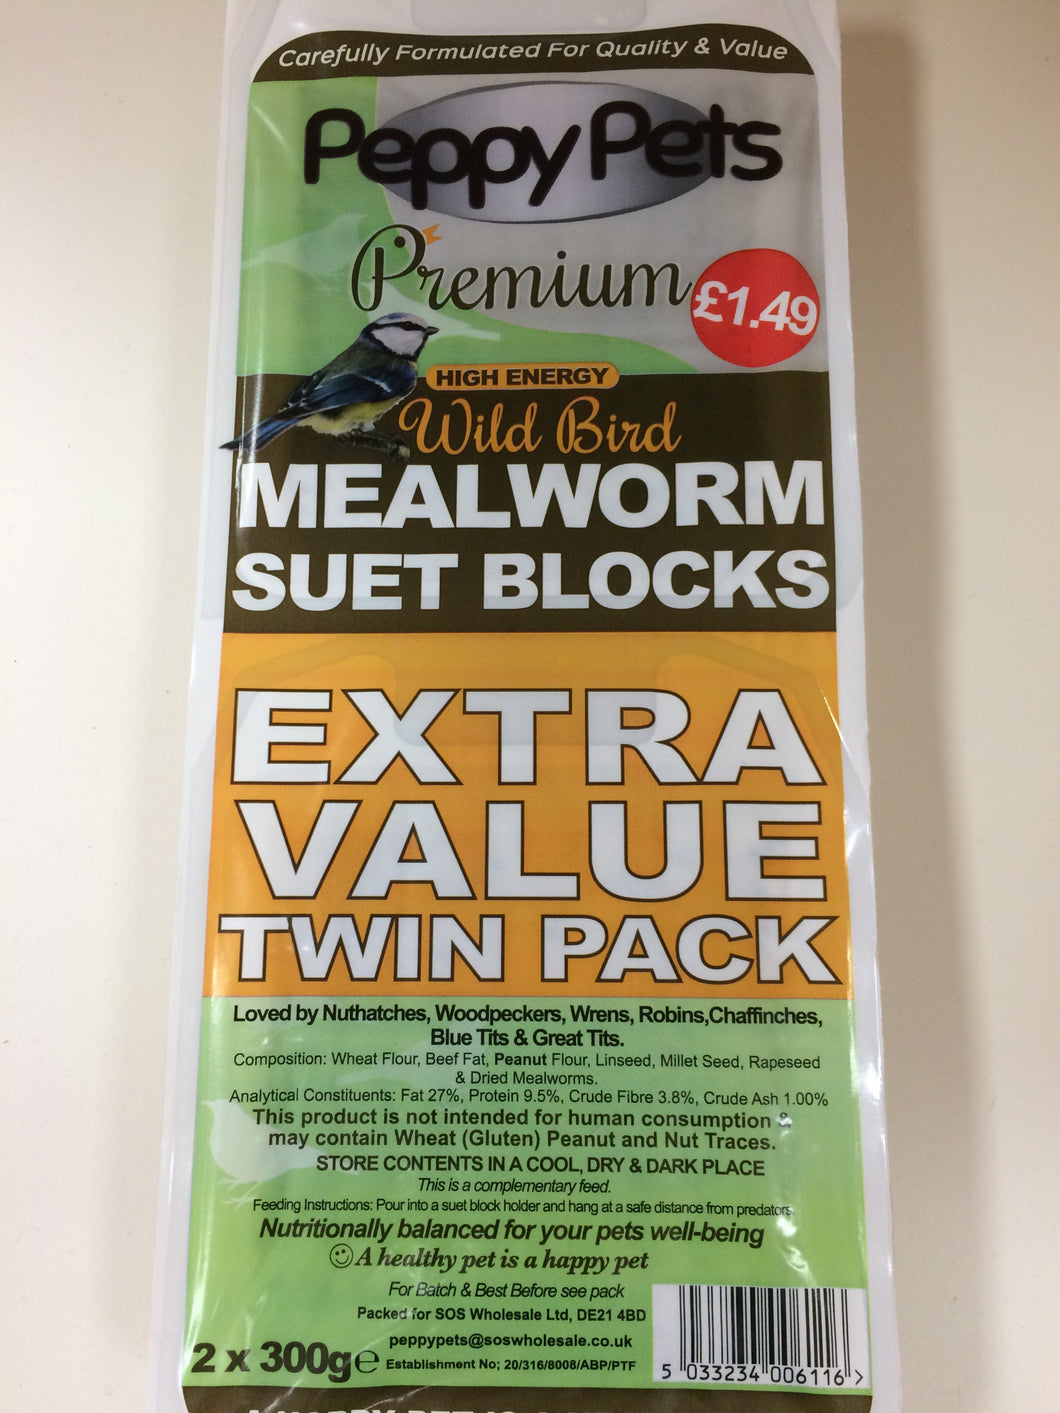 Peppy Pets #1 Mealworm Suet Blocks Value Twin Pack 2x 300g